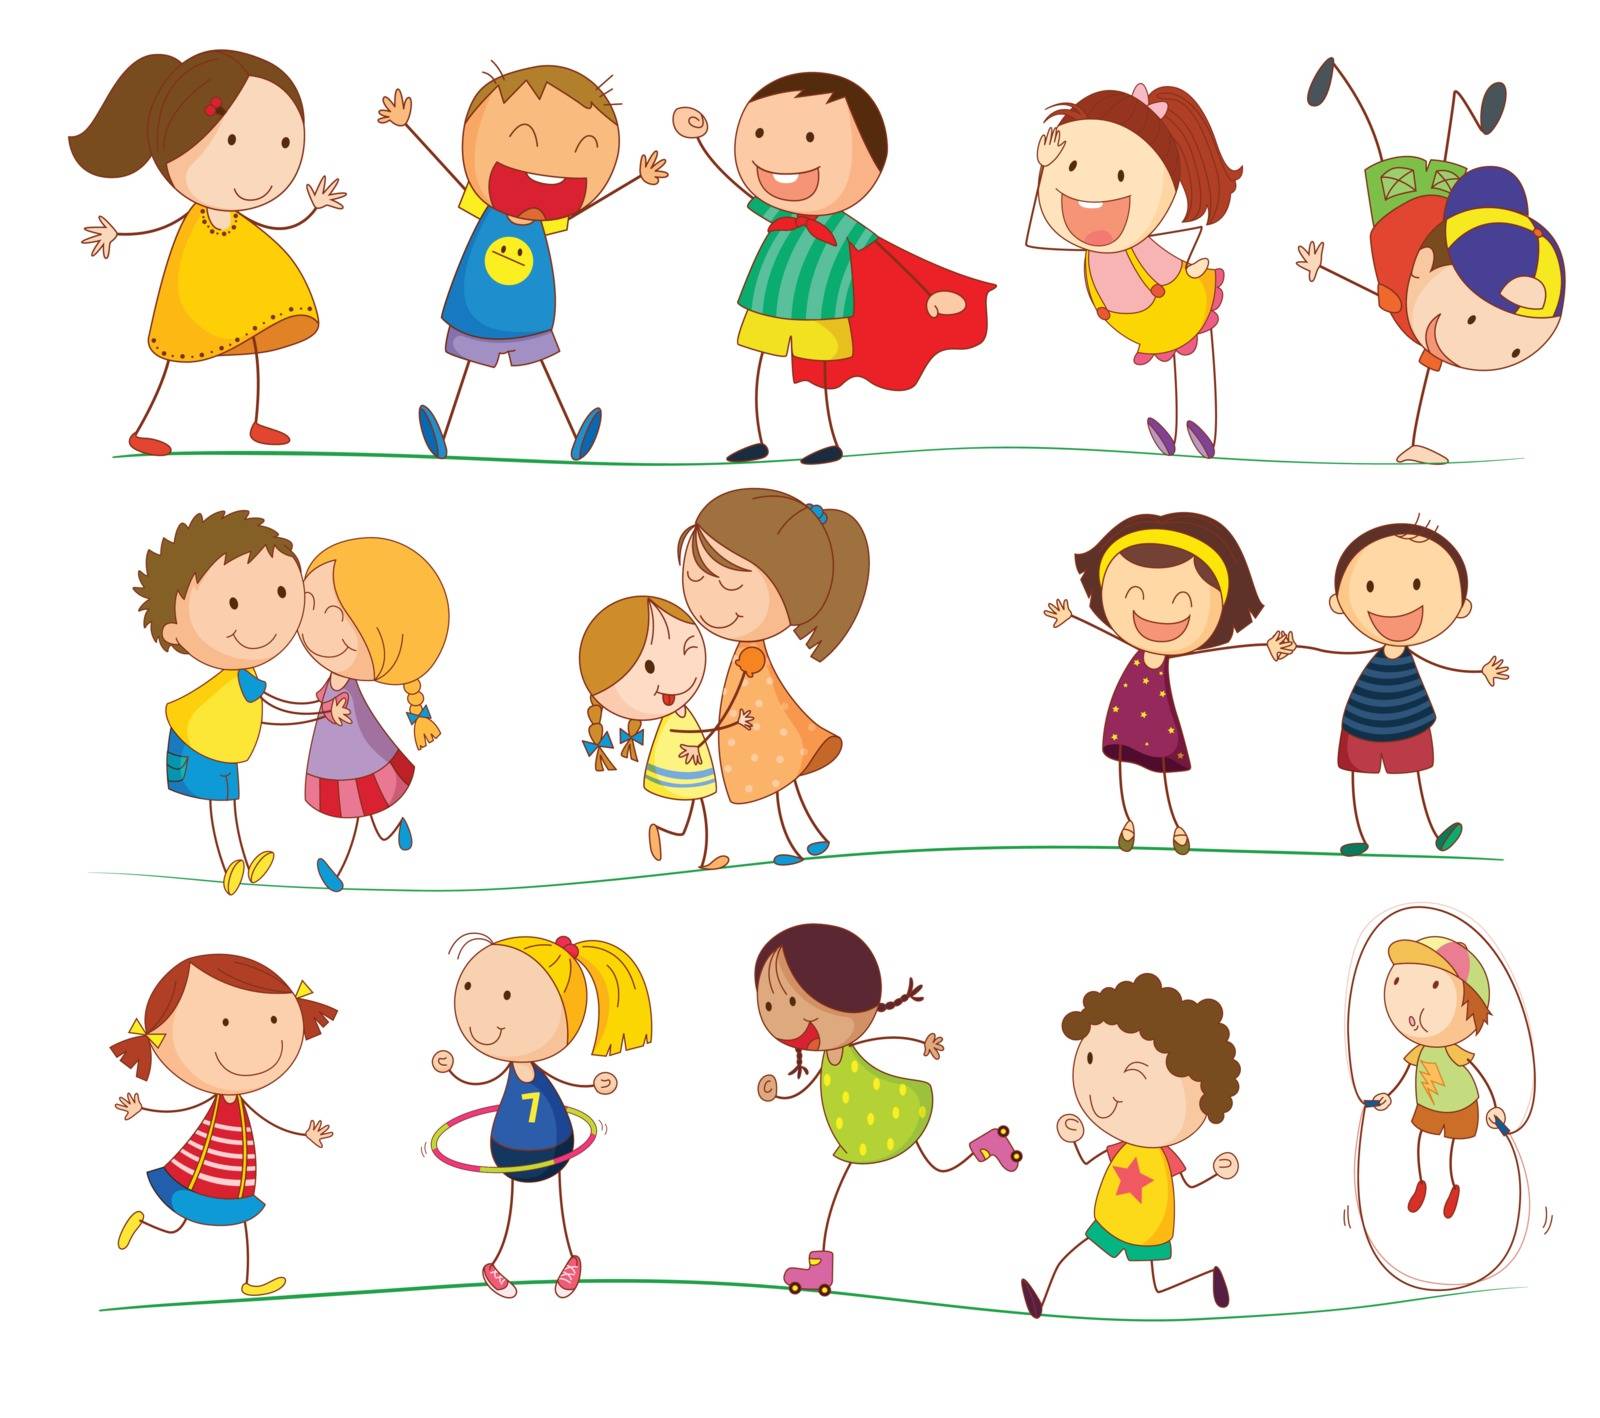 Illustration of simple kids playing